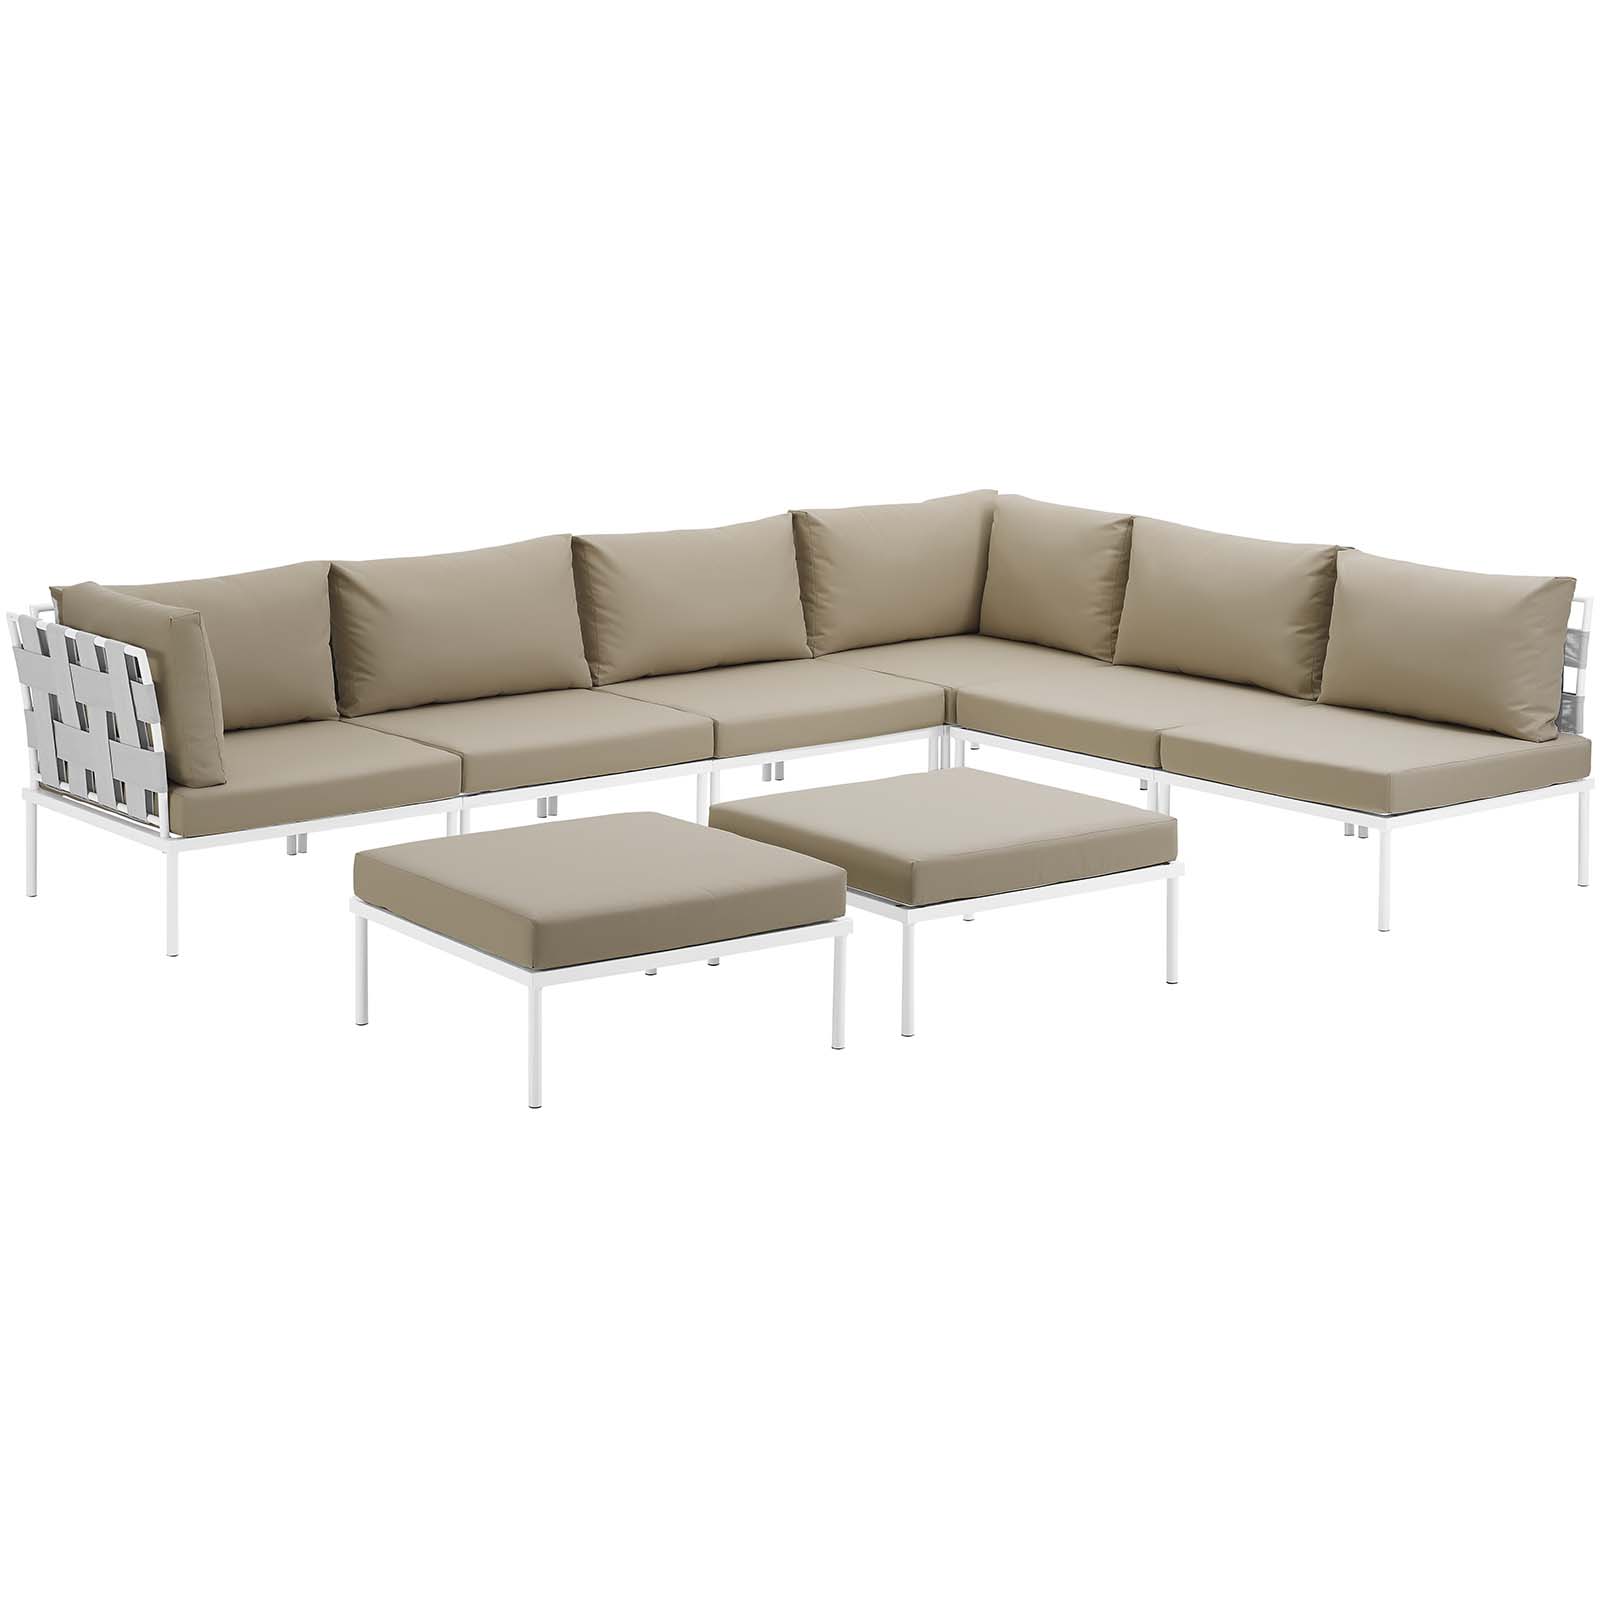 Modway Harmony 8 Piece Outdoor Patio Aluminum Sectional Sofa Set in White Beige - image 3 of 7